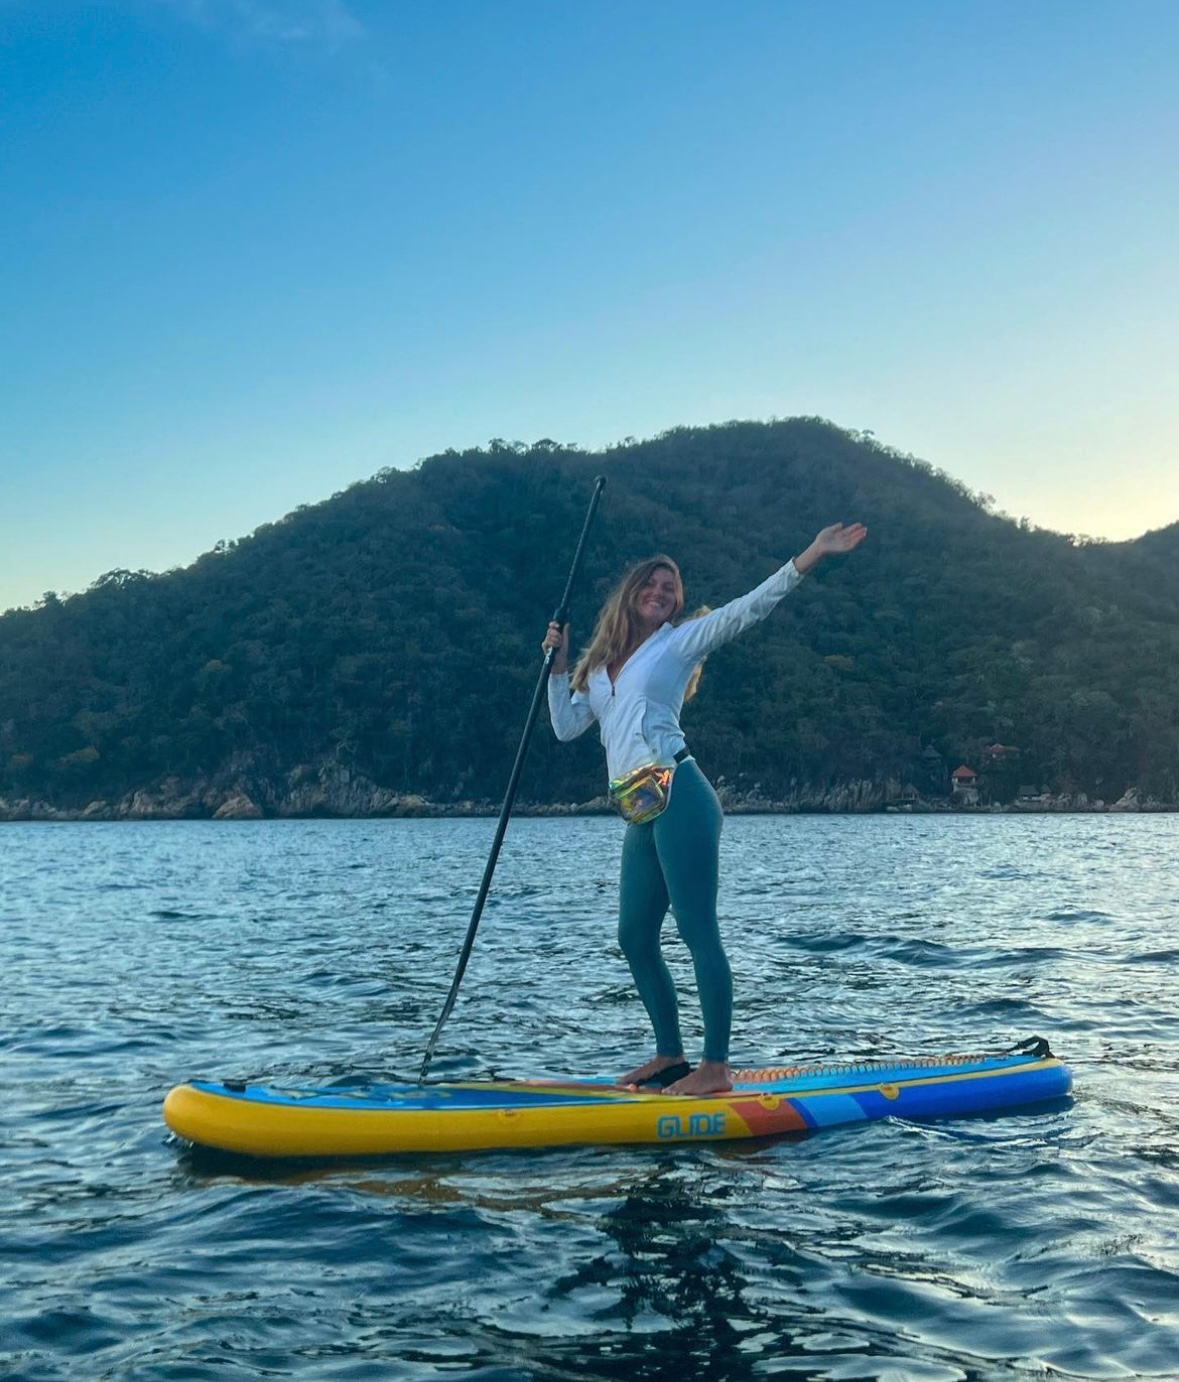 maximum weight capacity for SUP yoga and long boards 